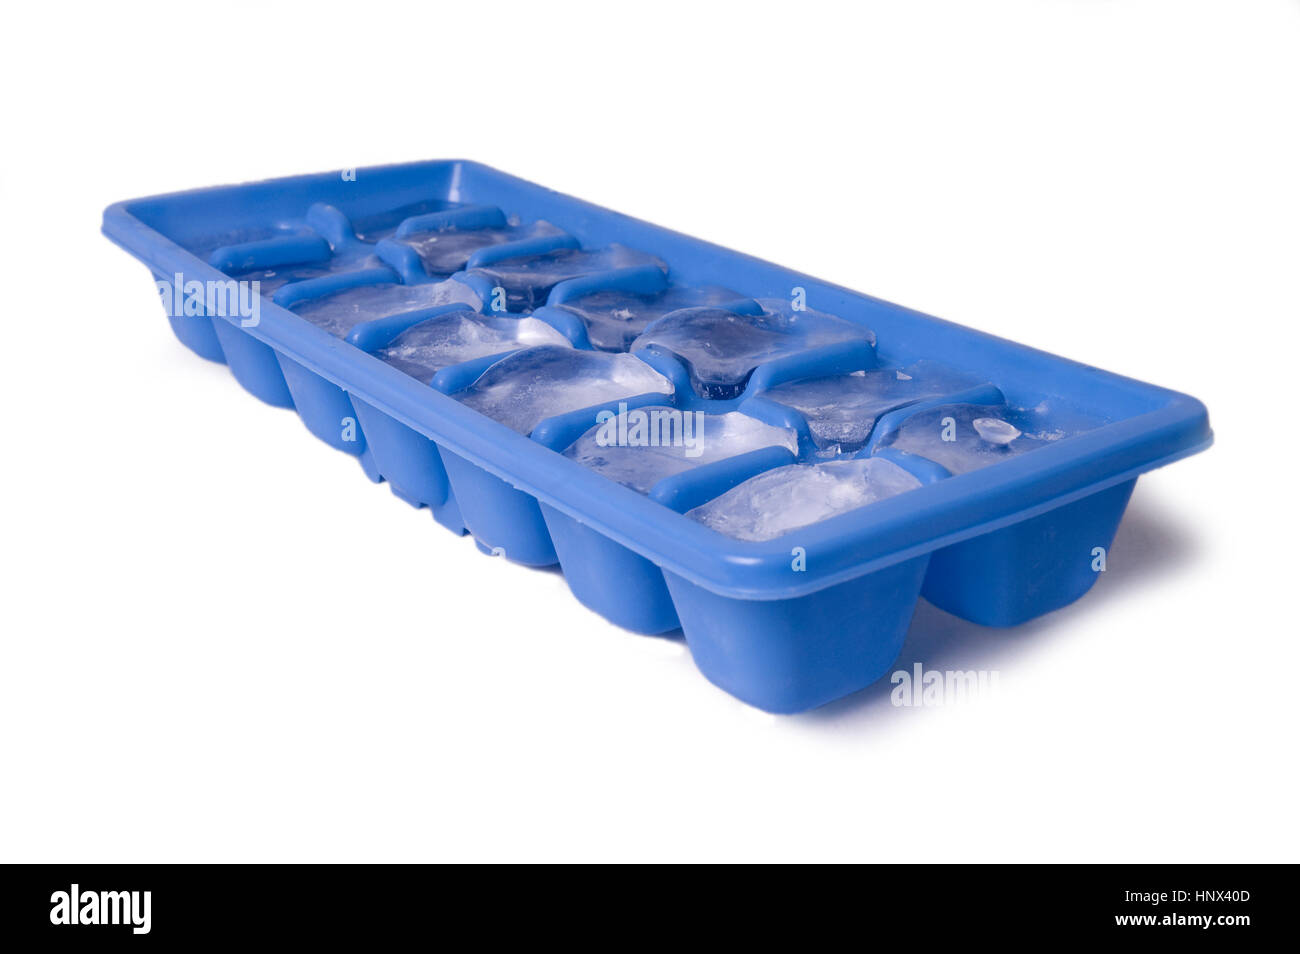 Rubber Ice Tray Isolated On White Background With Clipping Path Stock Photo  - Download Image Now - iStock